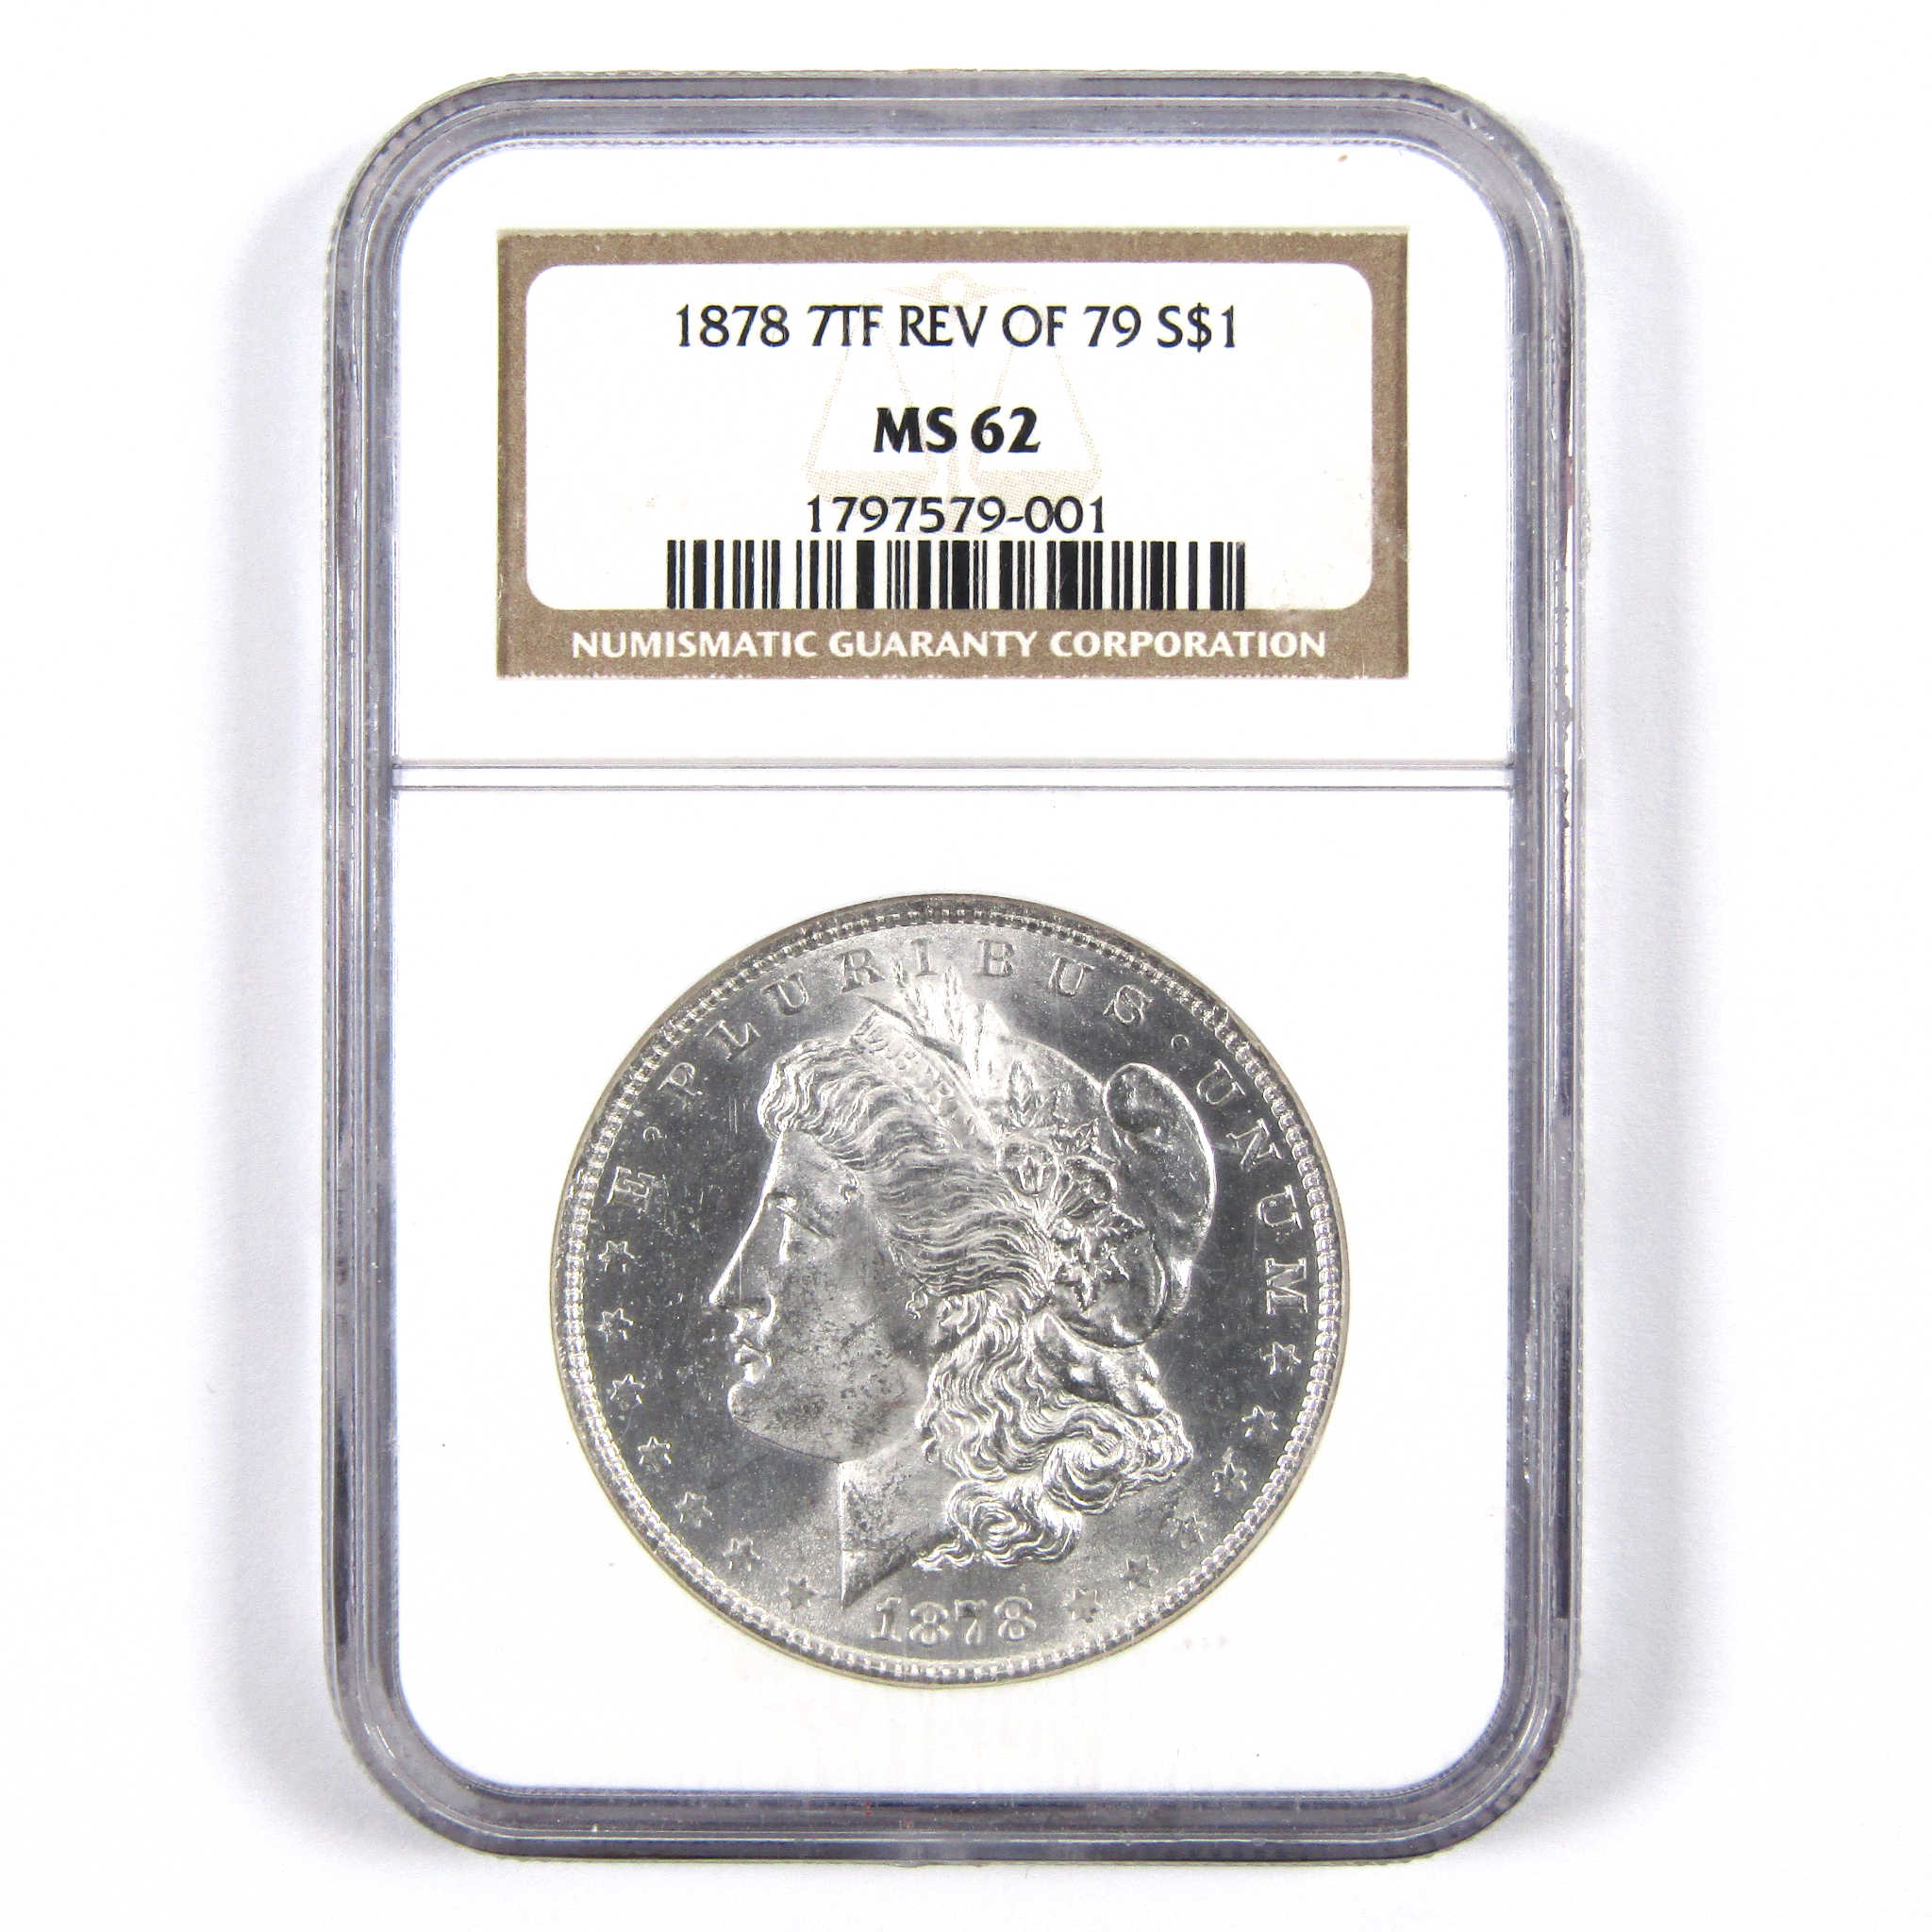 1878 7TF Rev 79 Morgan Dollar MS 62 NGC 90% Silver $1 Unc SKU:I7542 - Morgan coin - Morgan silver dollar - Morgan silver dollar for sale - Profile Coins &amp; Collectibles